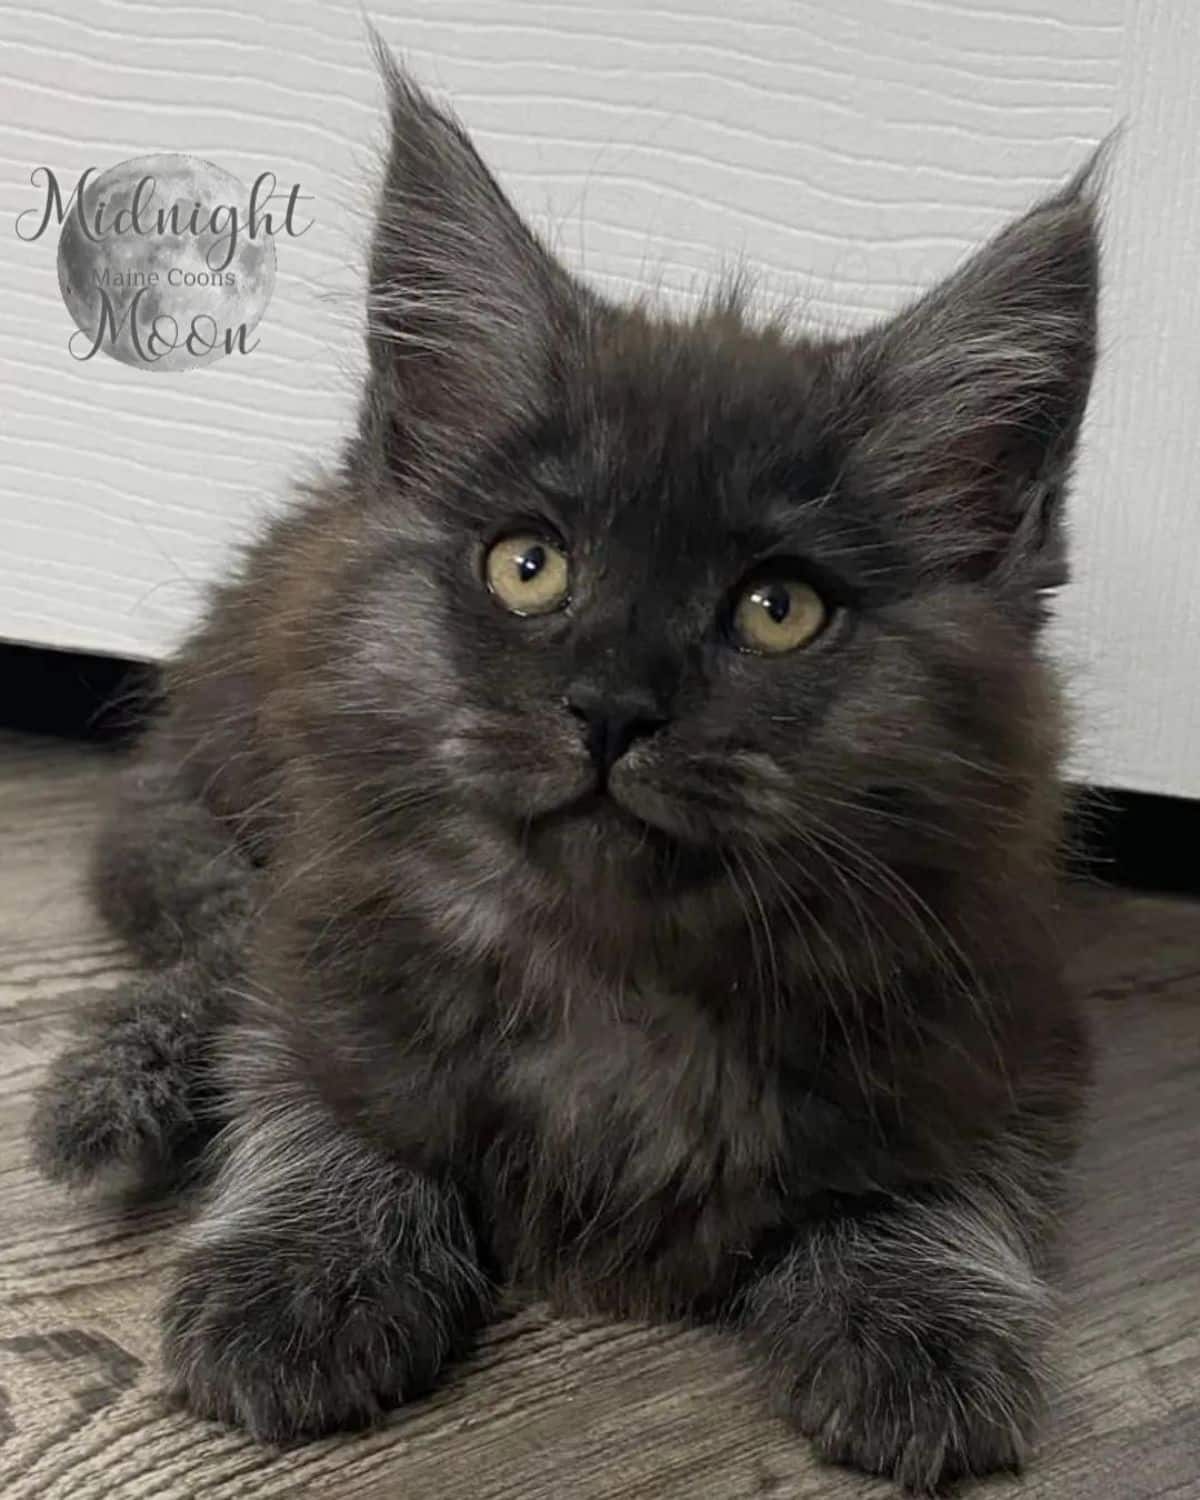 An adorable black maine coon kitten lying on a floor.